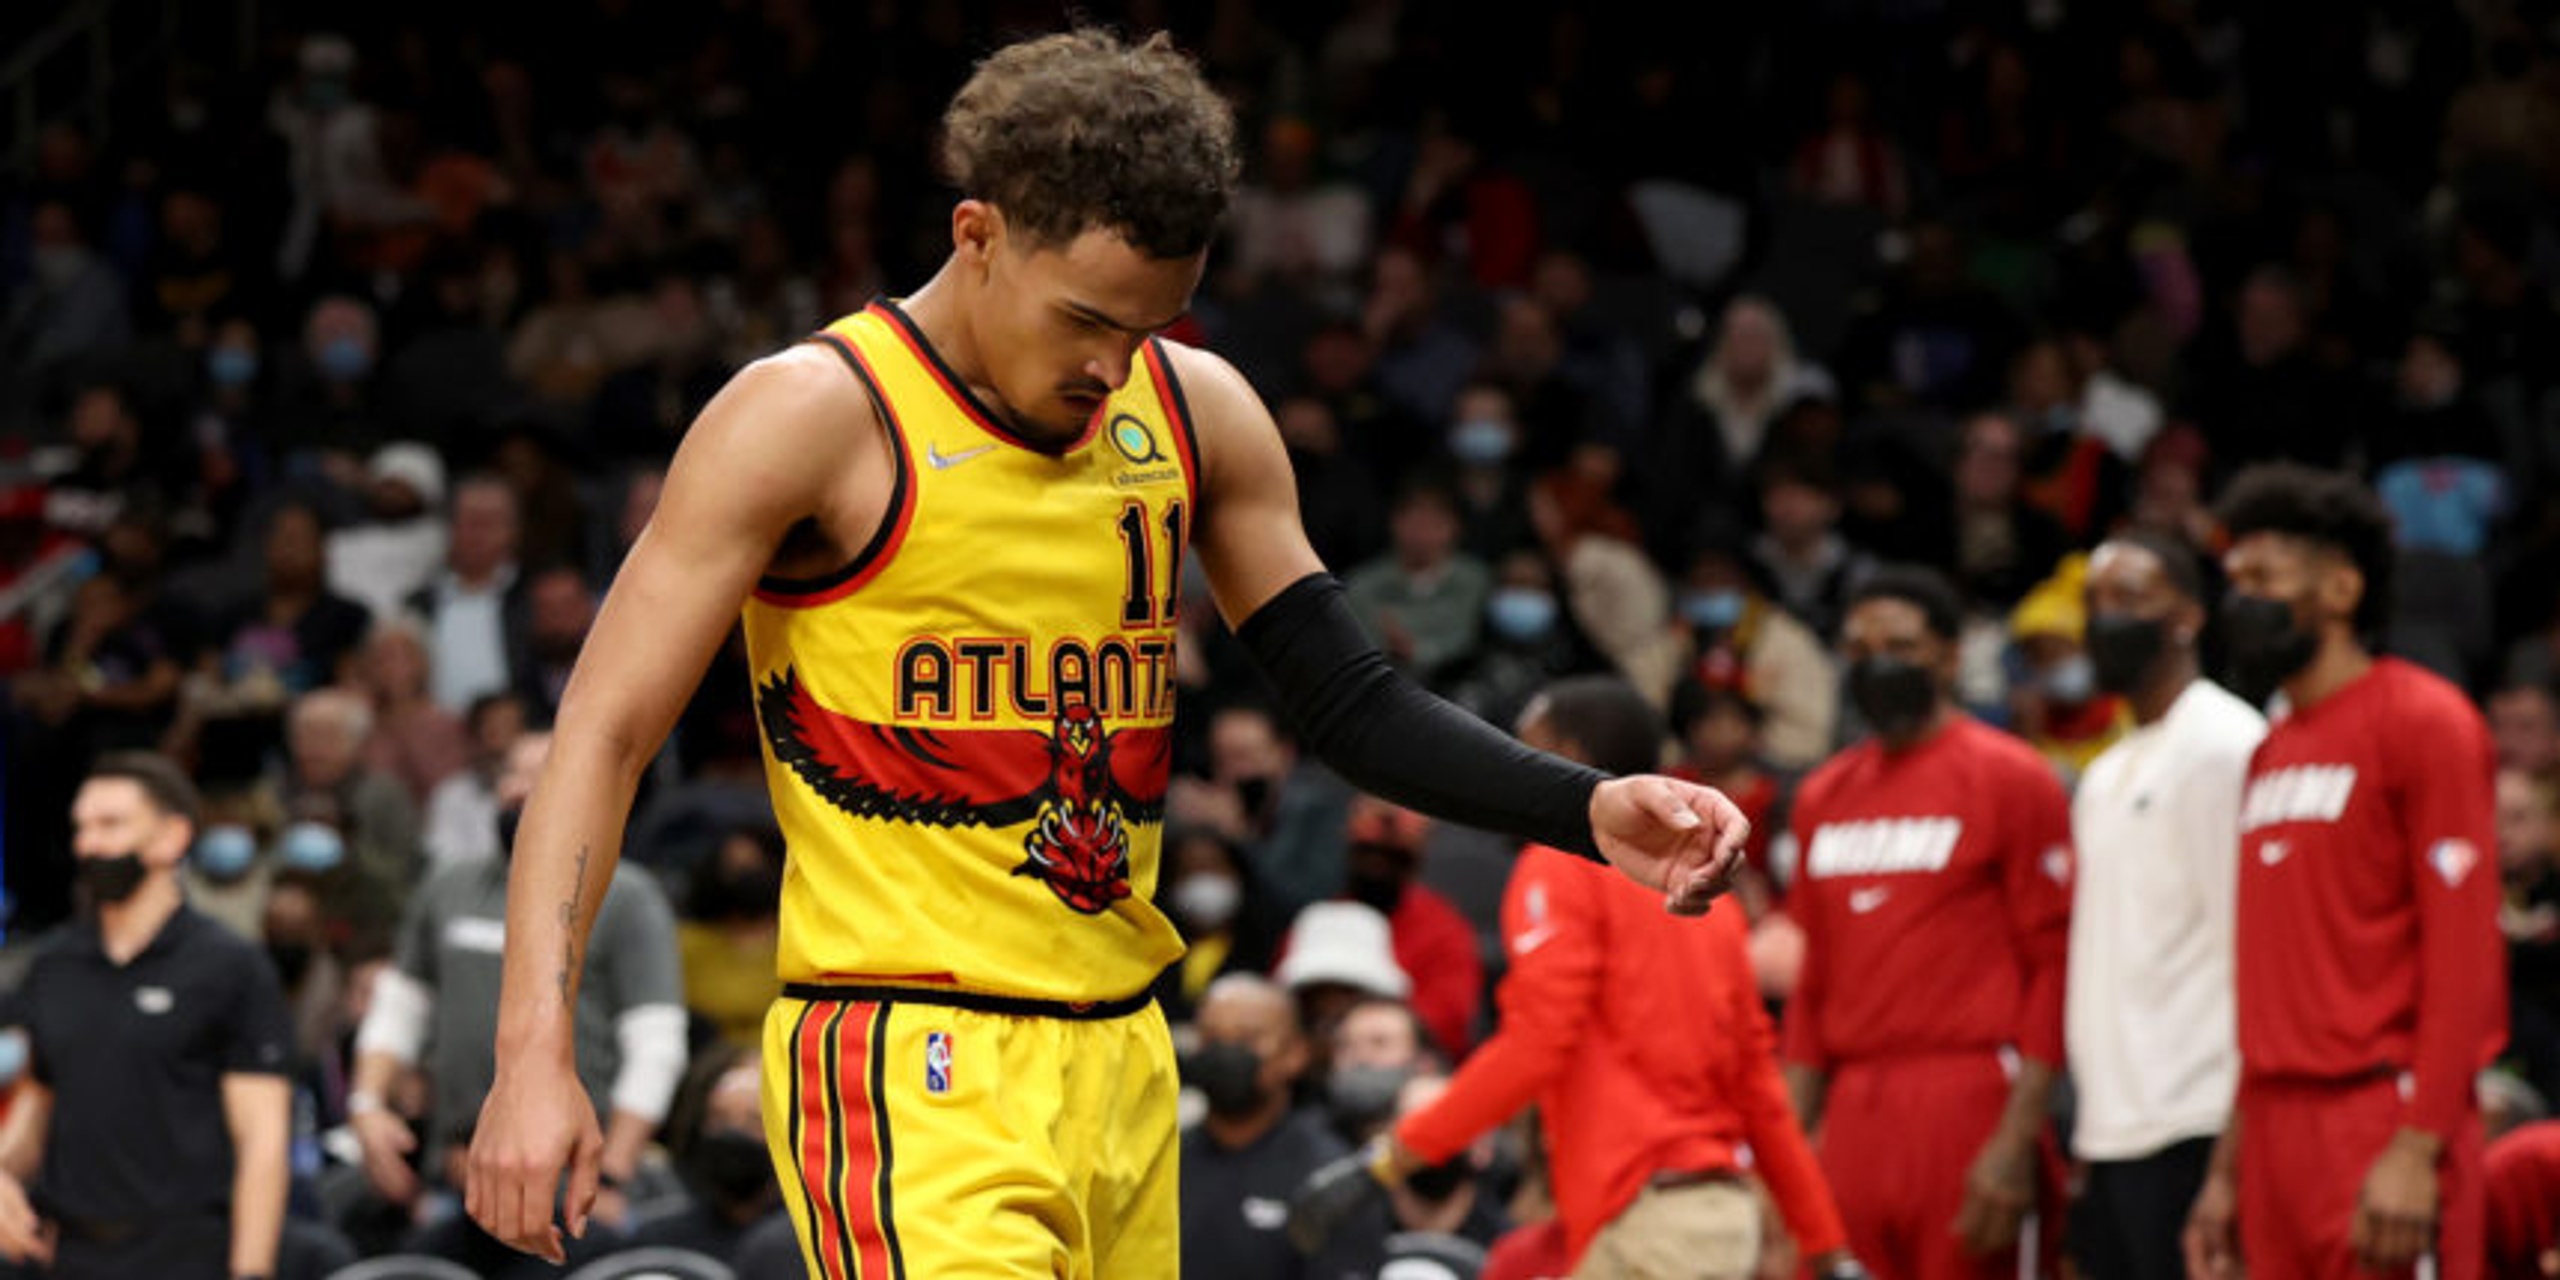 After thrilling playoffs, Hawks limping into NBA postseason